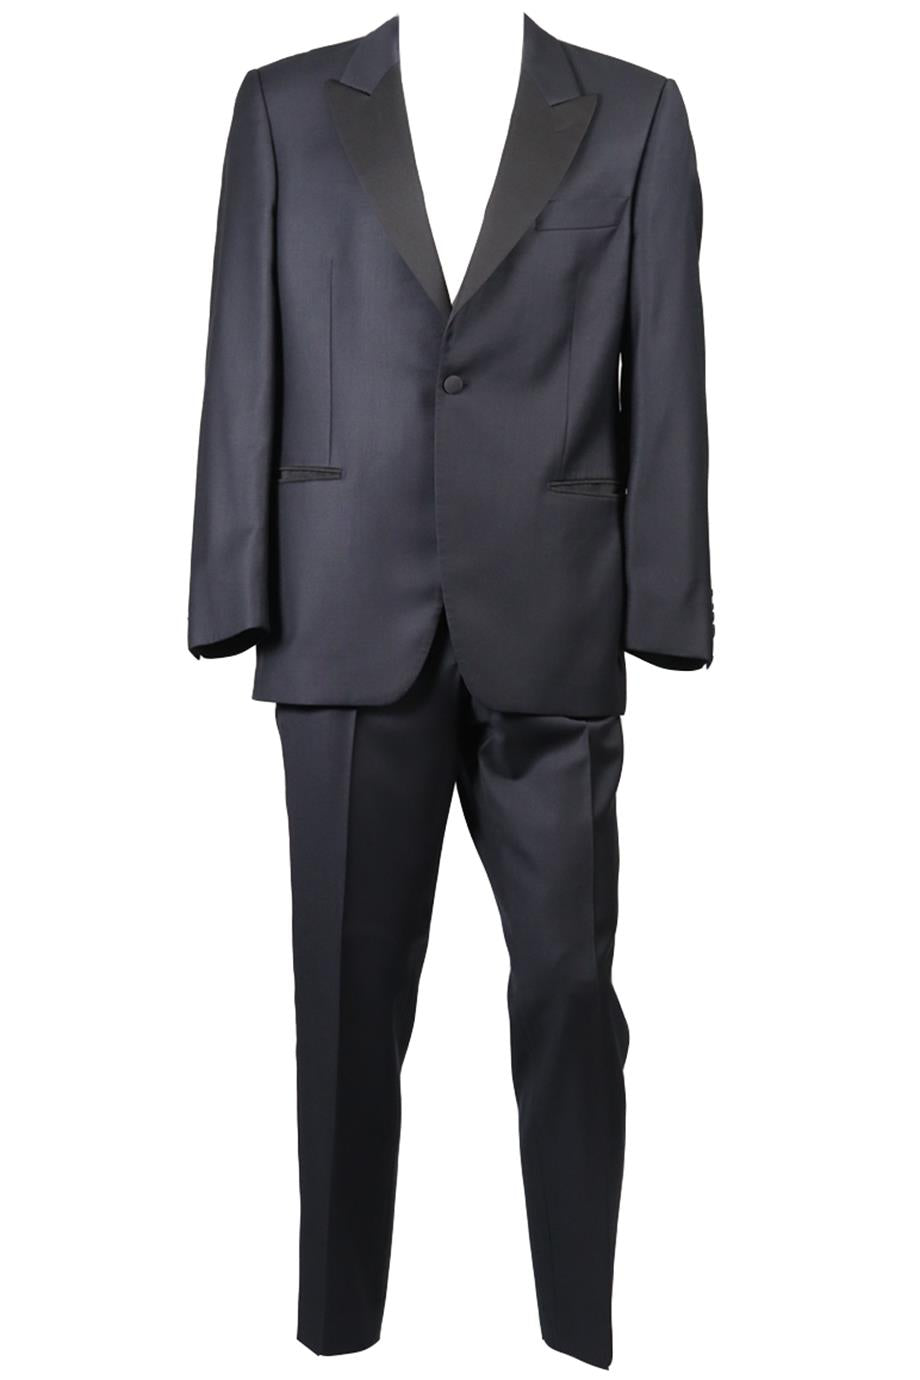 GIEVES & HAWKES MEN'S WOOL TWO PIECE SUIT W34